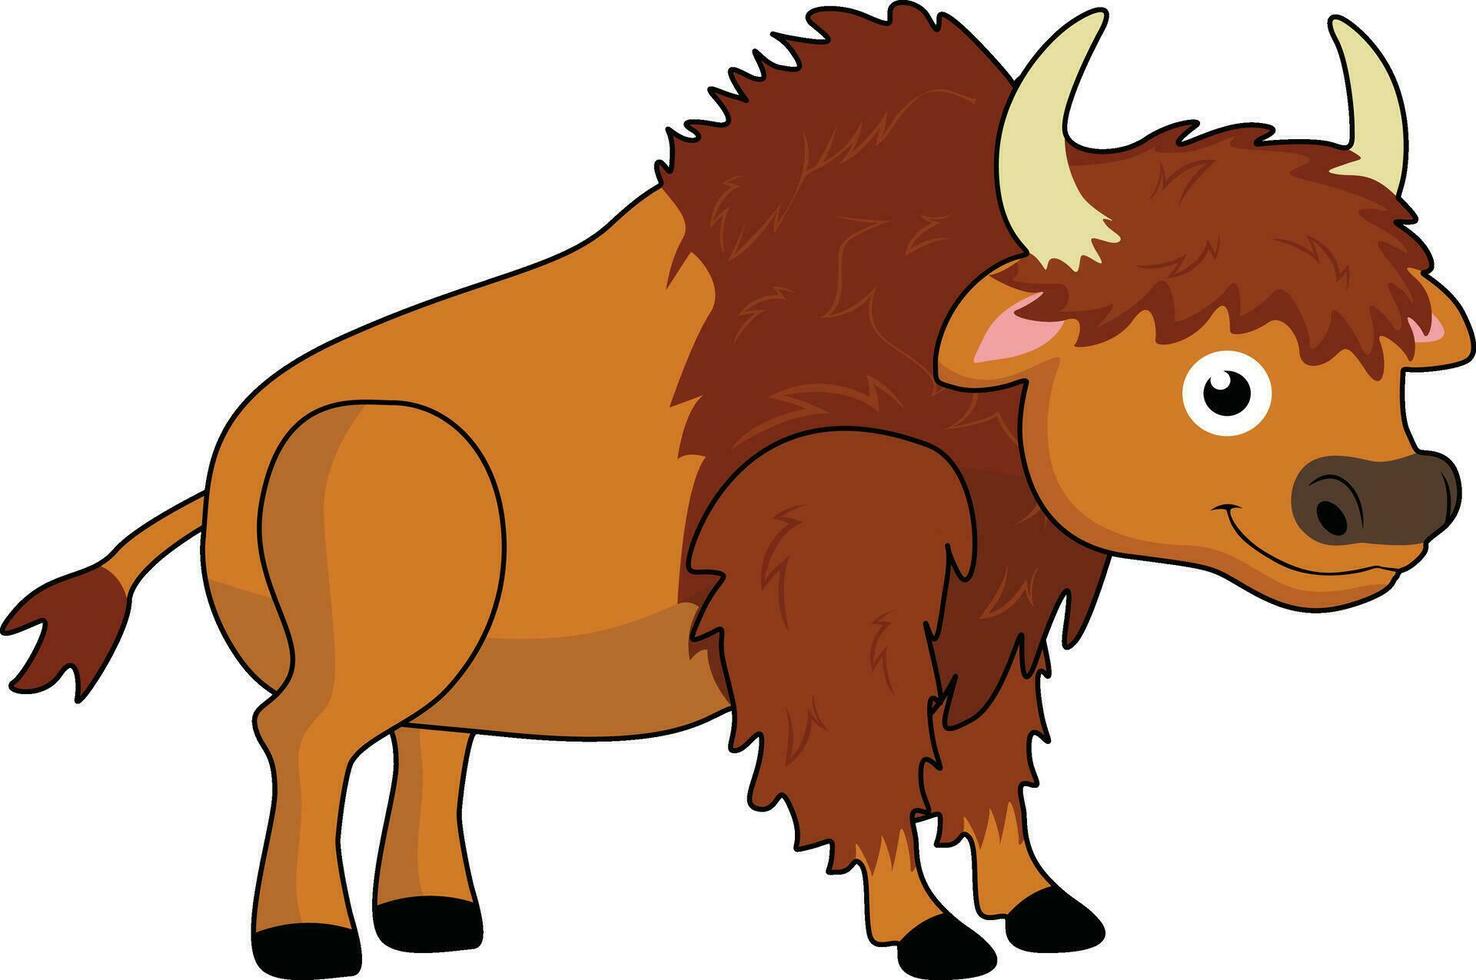 Cute bison designed using vector lines. You can adjust the line thickness